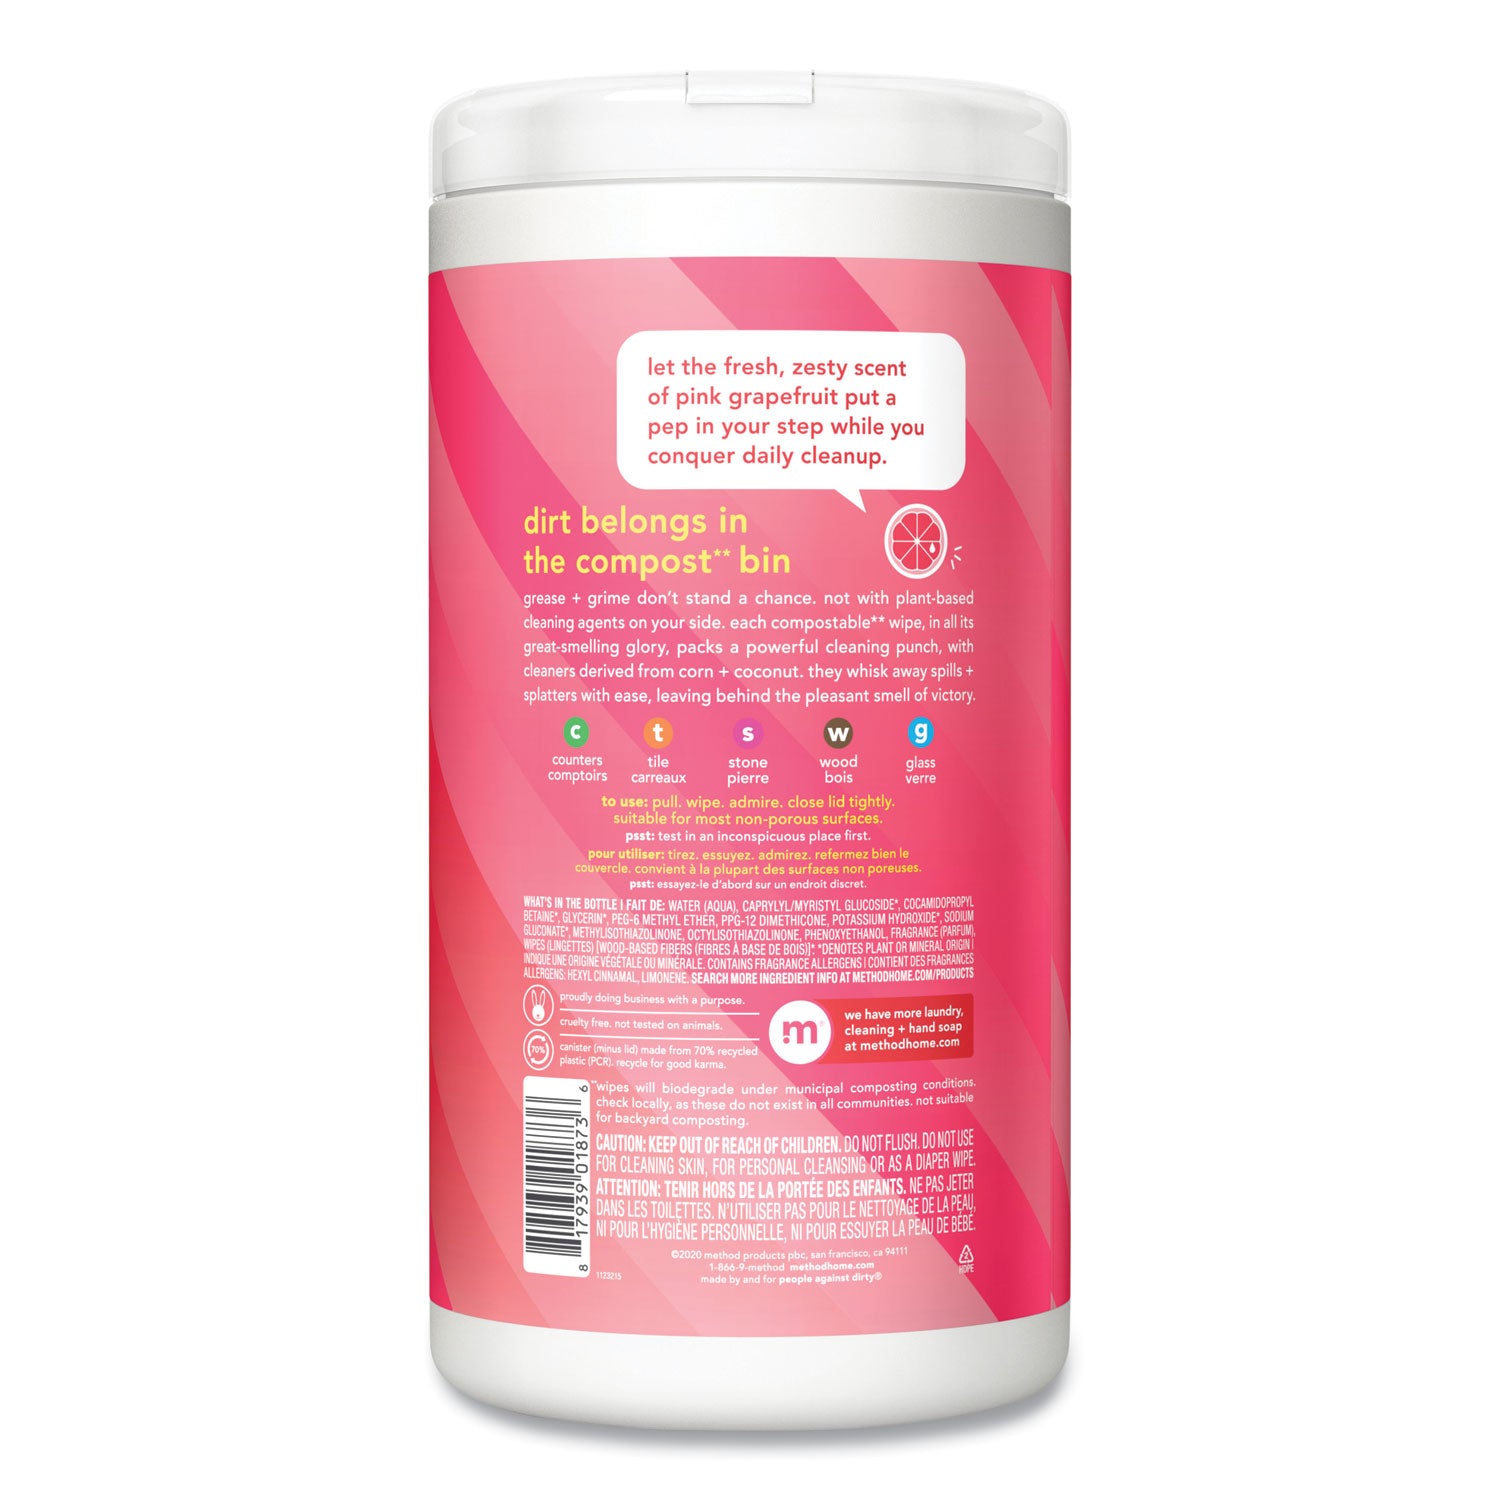 all-purpose-cleaning-wipes-1-ply-pink-grapefruit-white-70-canister-6-carton_mth338527 - 2